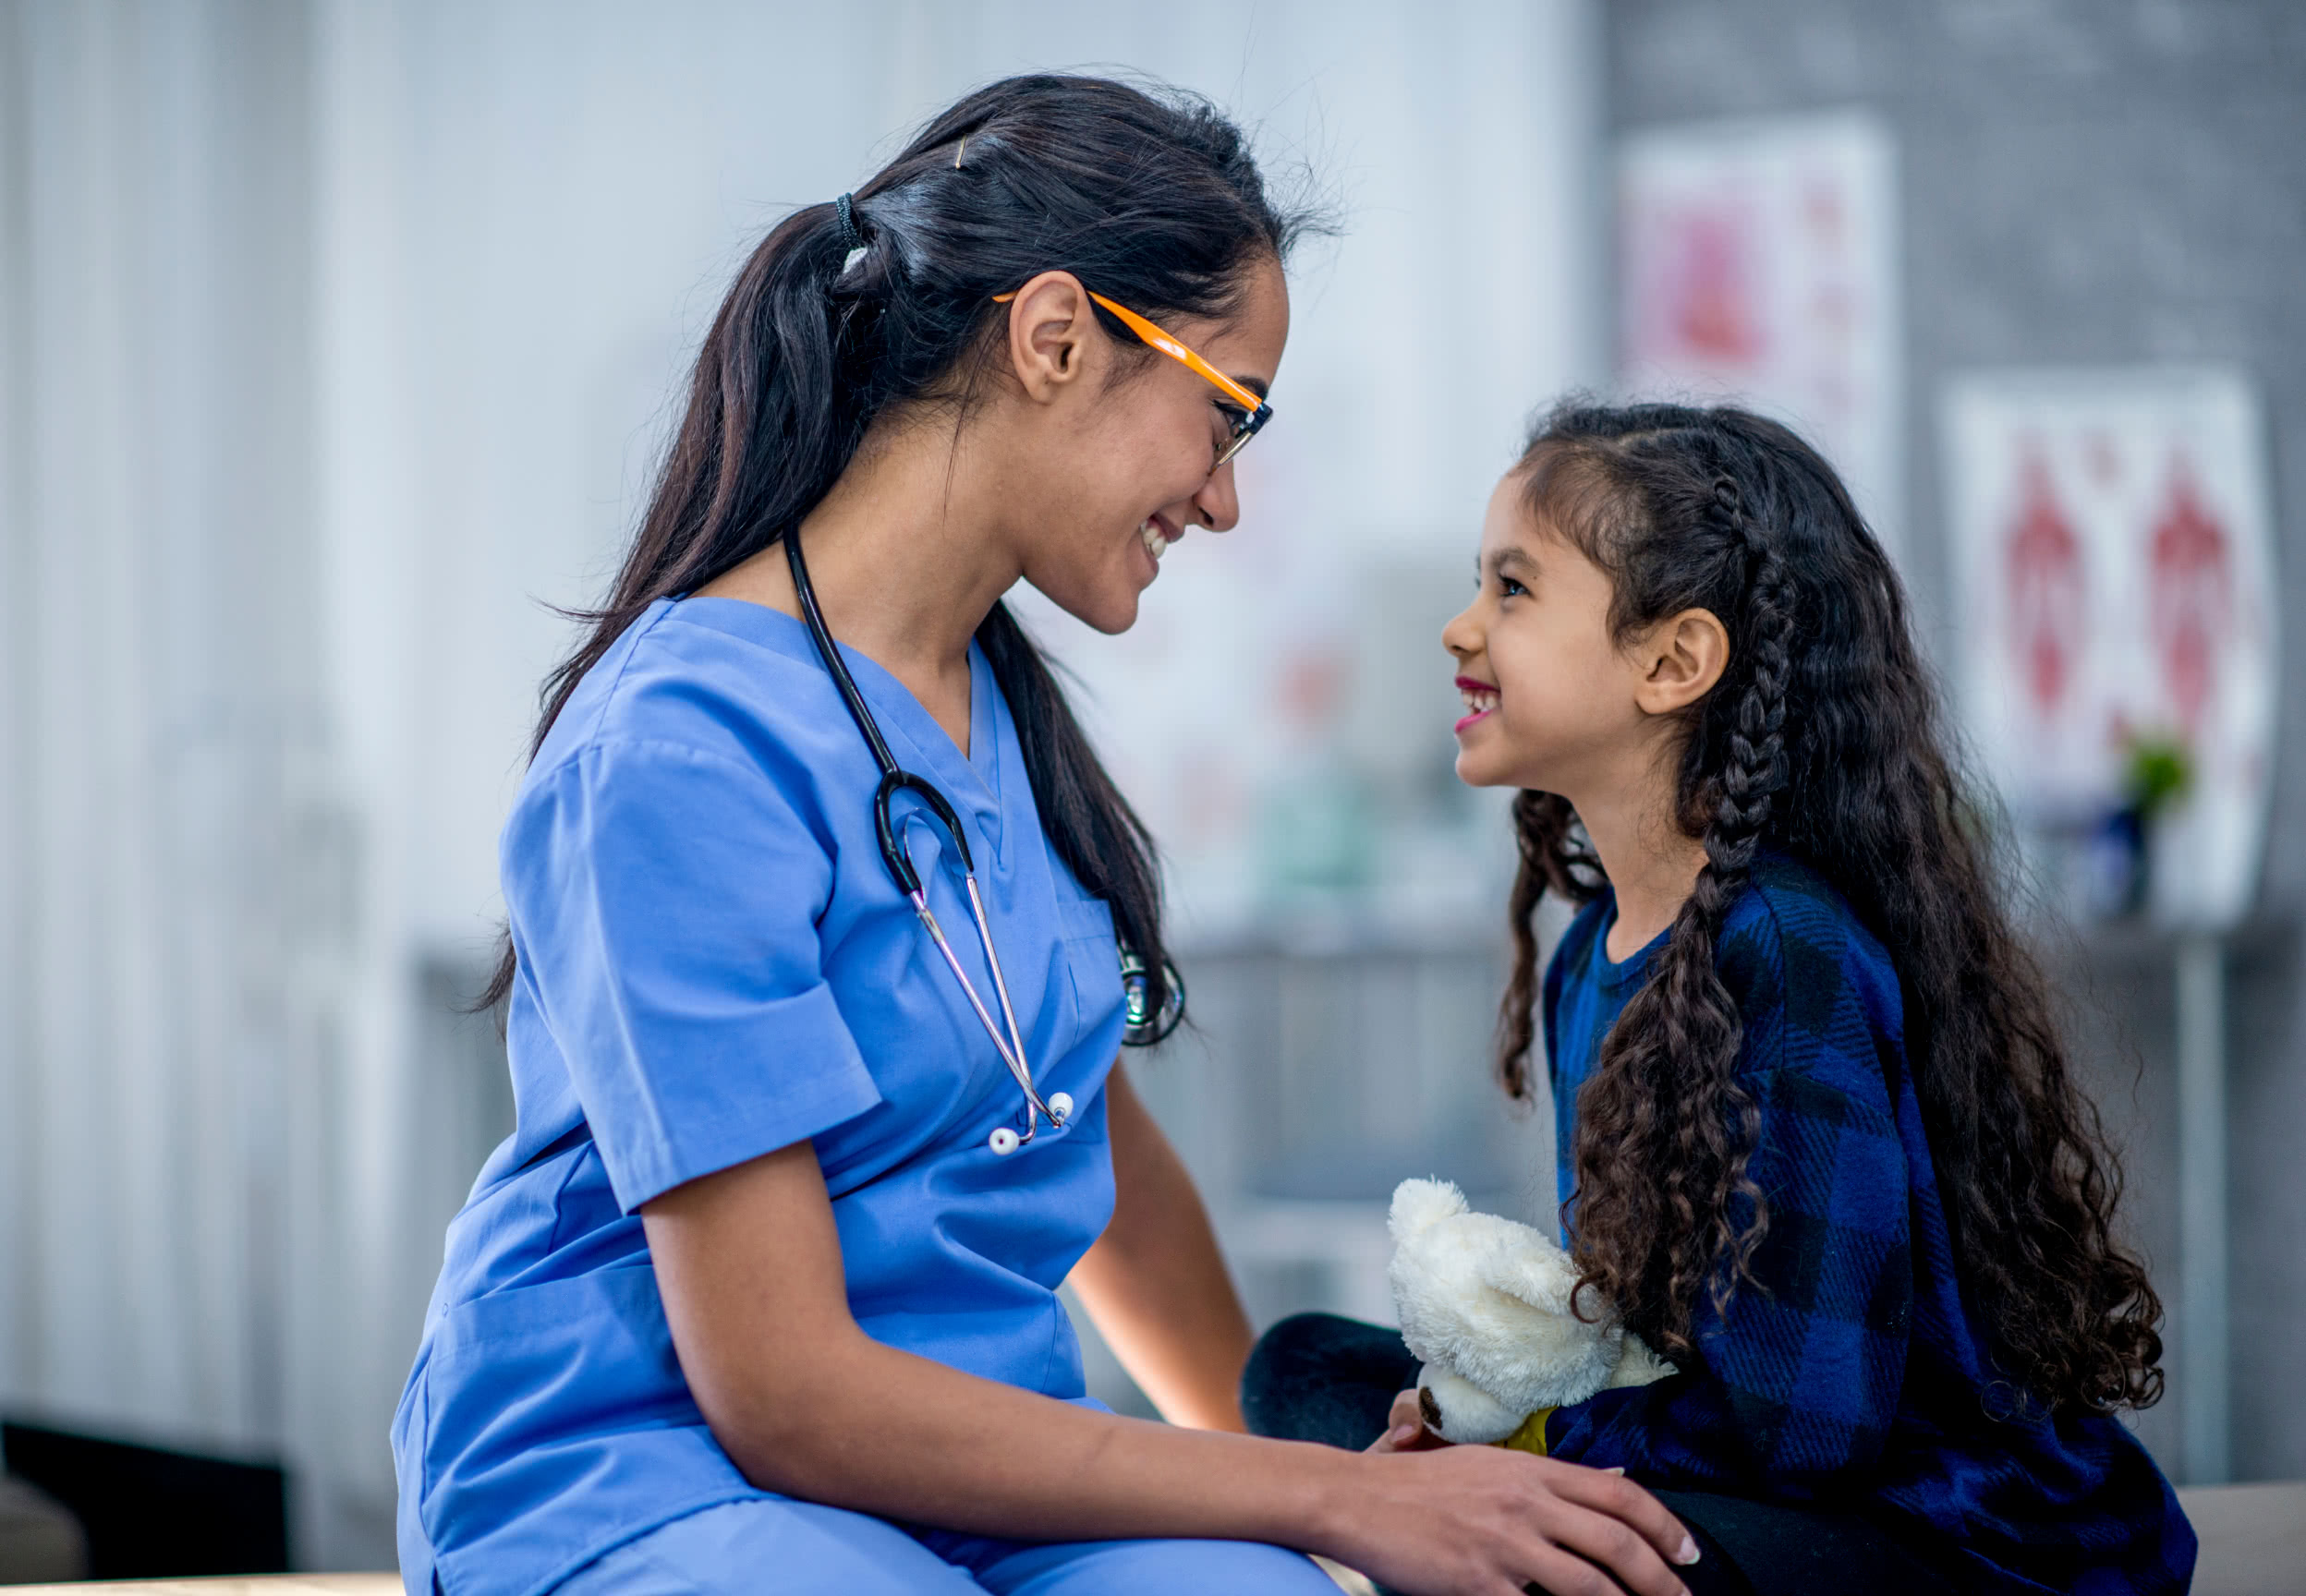 Care provider with young patient, both smiling